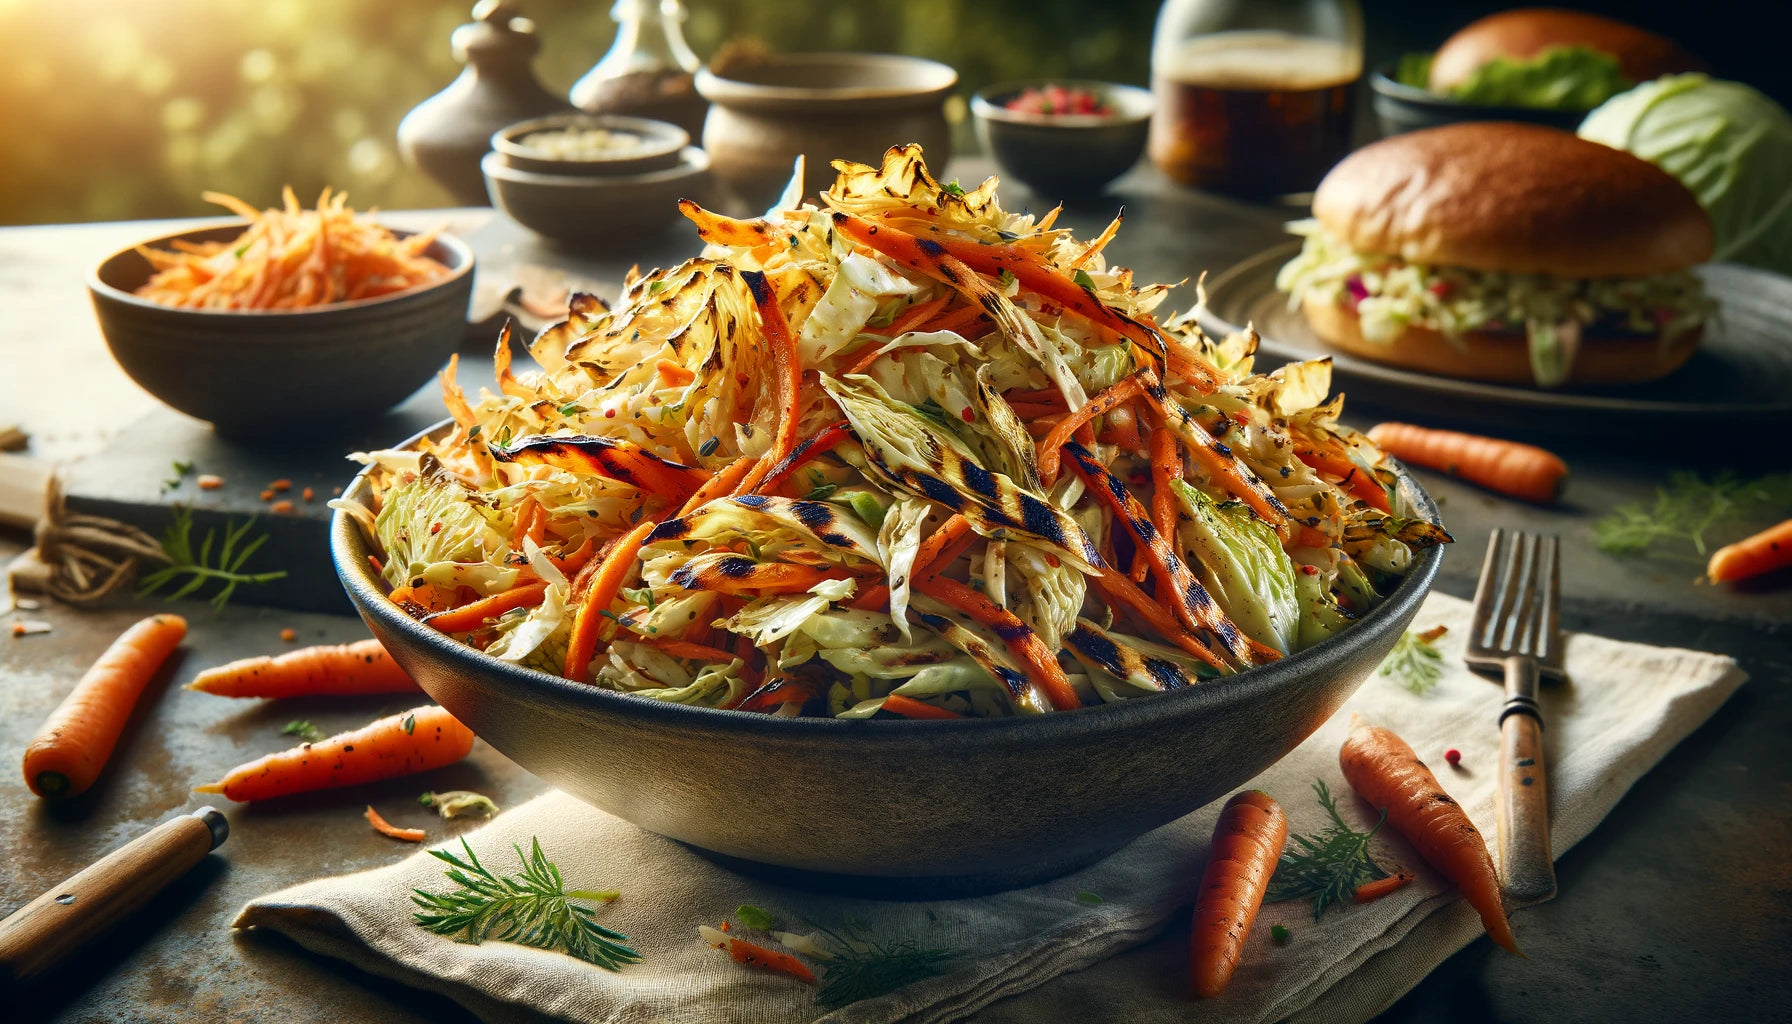 Grilled Crispy Coleslaw Recipe | Arteflame Grill Cooking